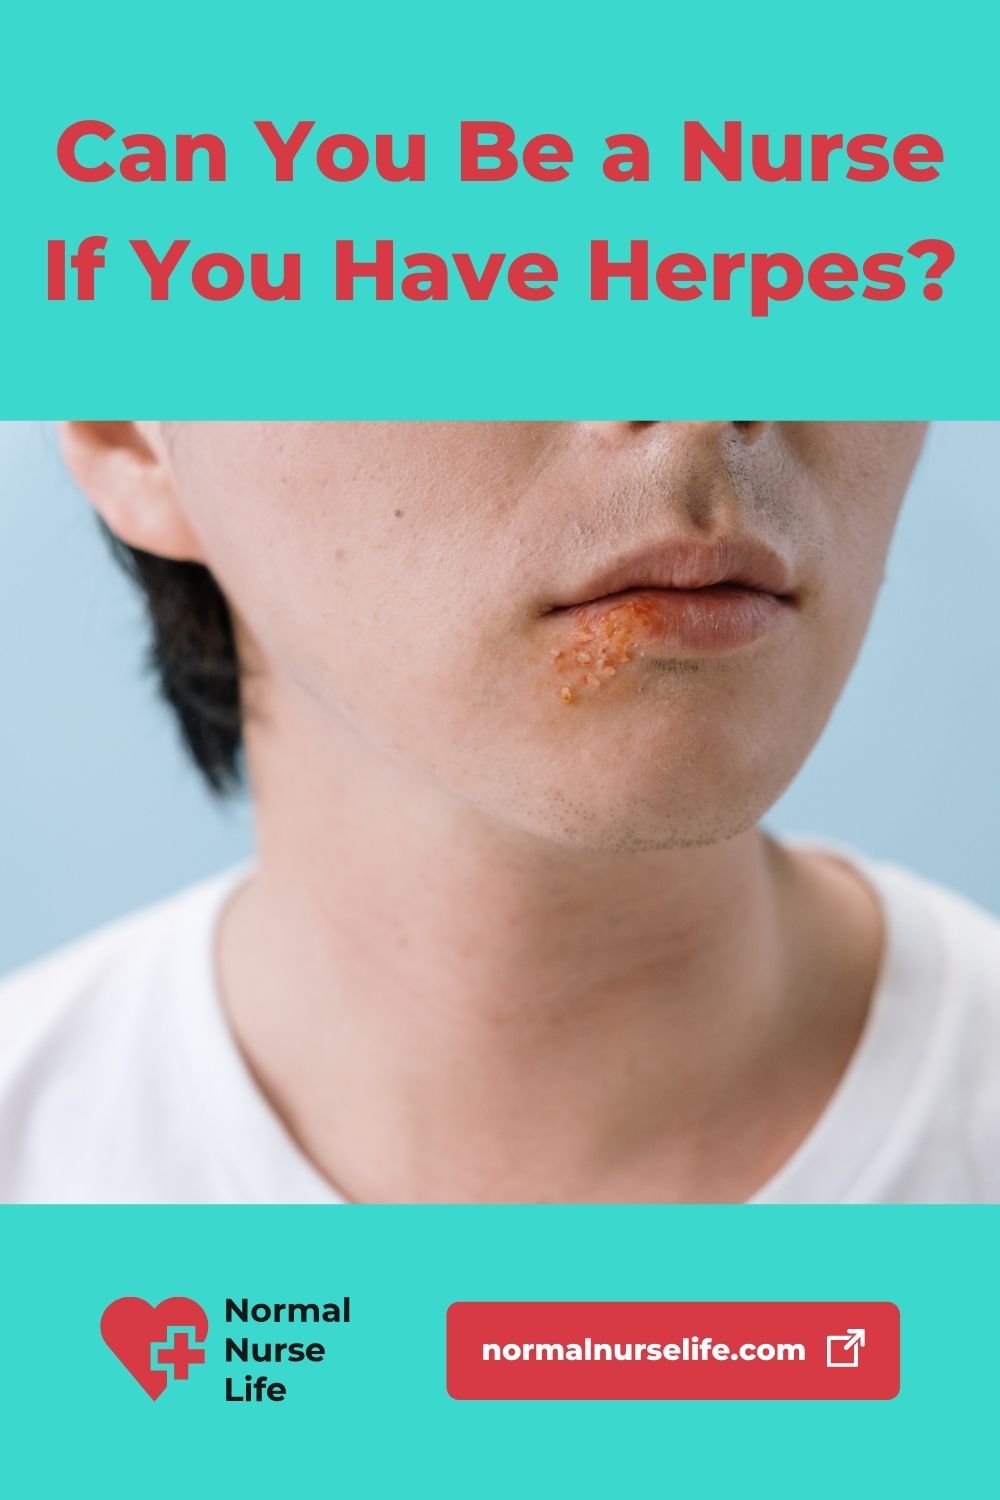 Can You Be a Nurse and Have Herpes?